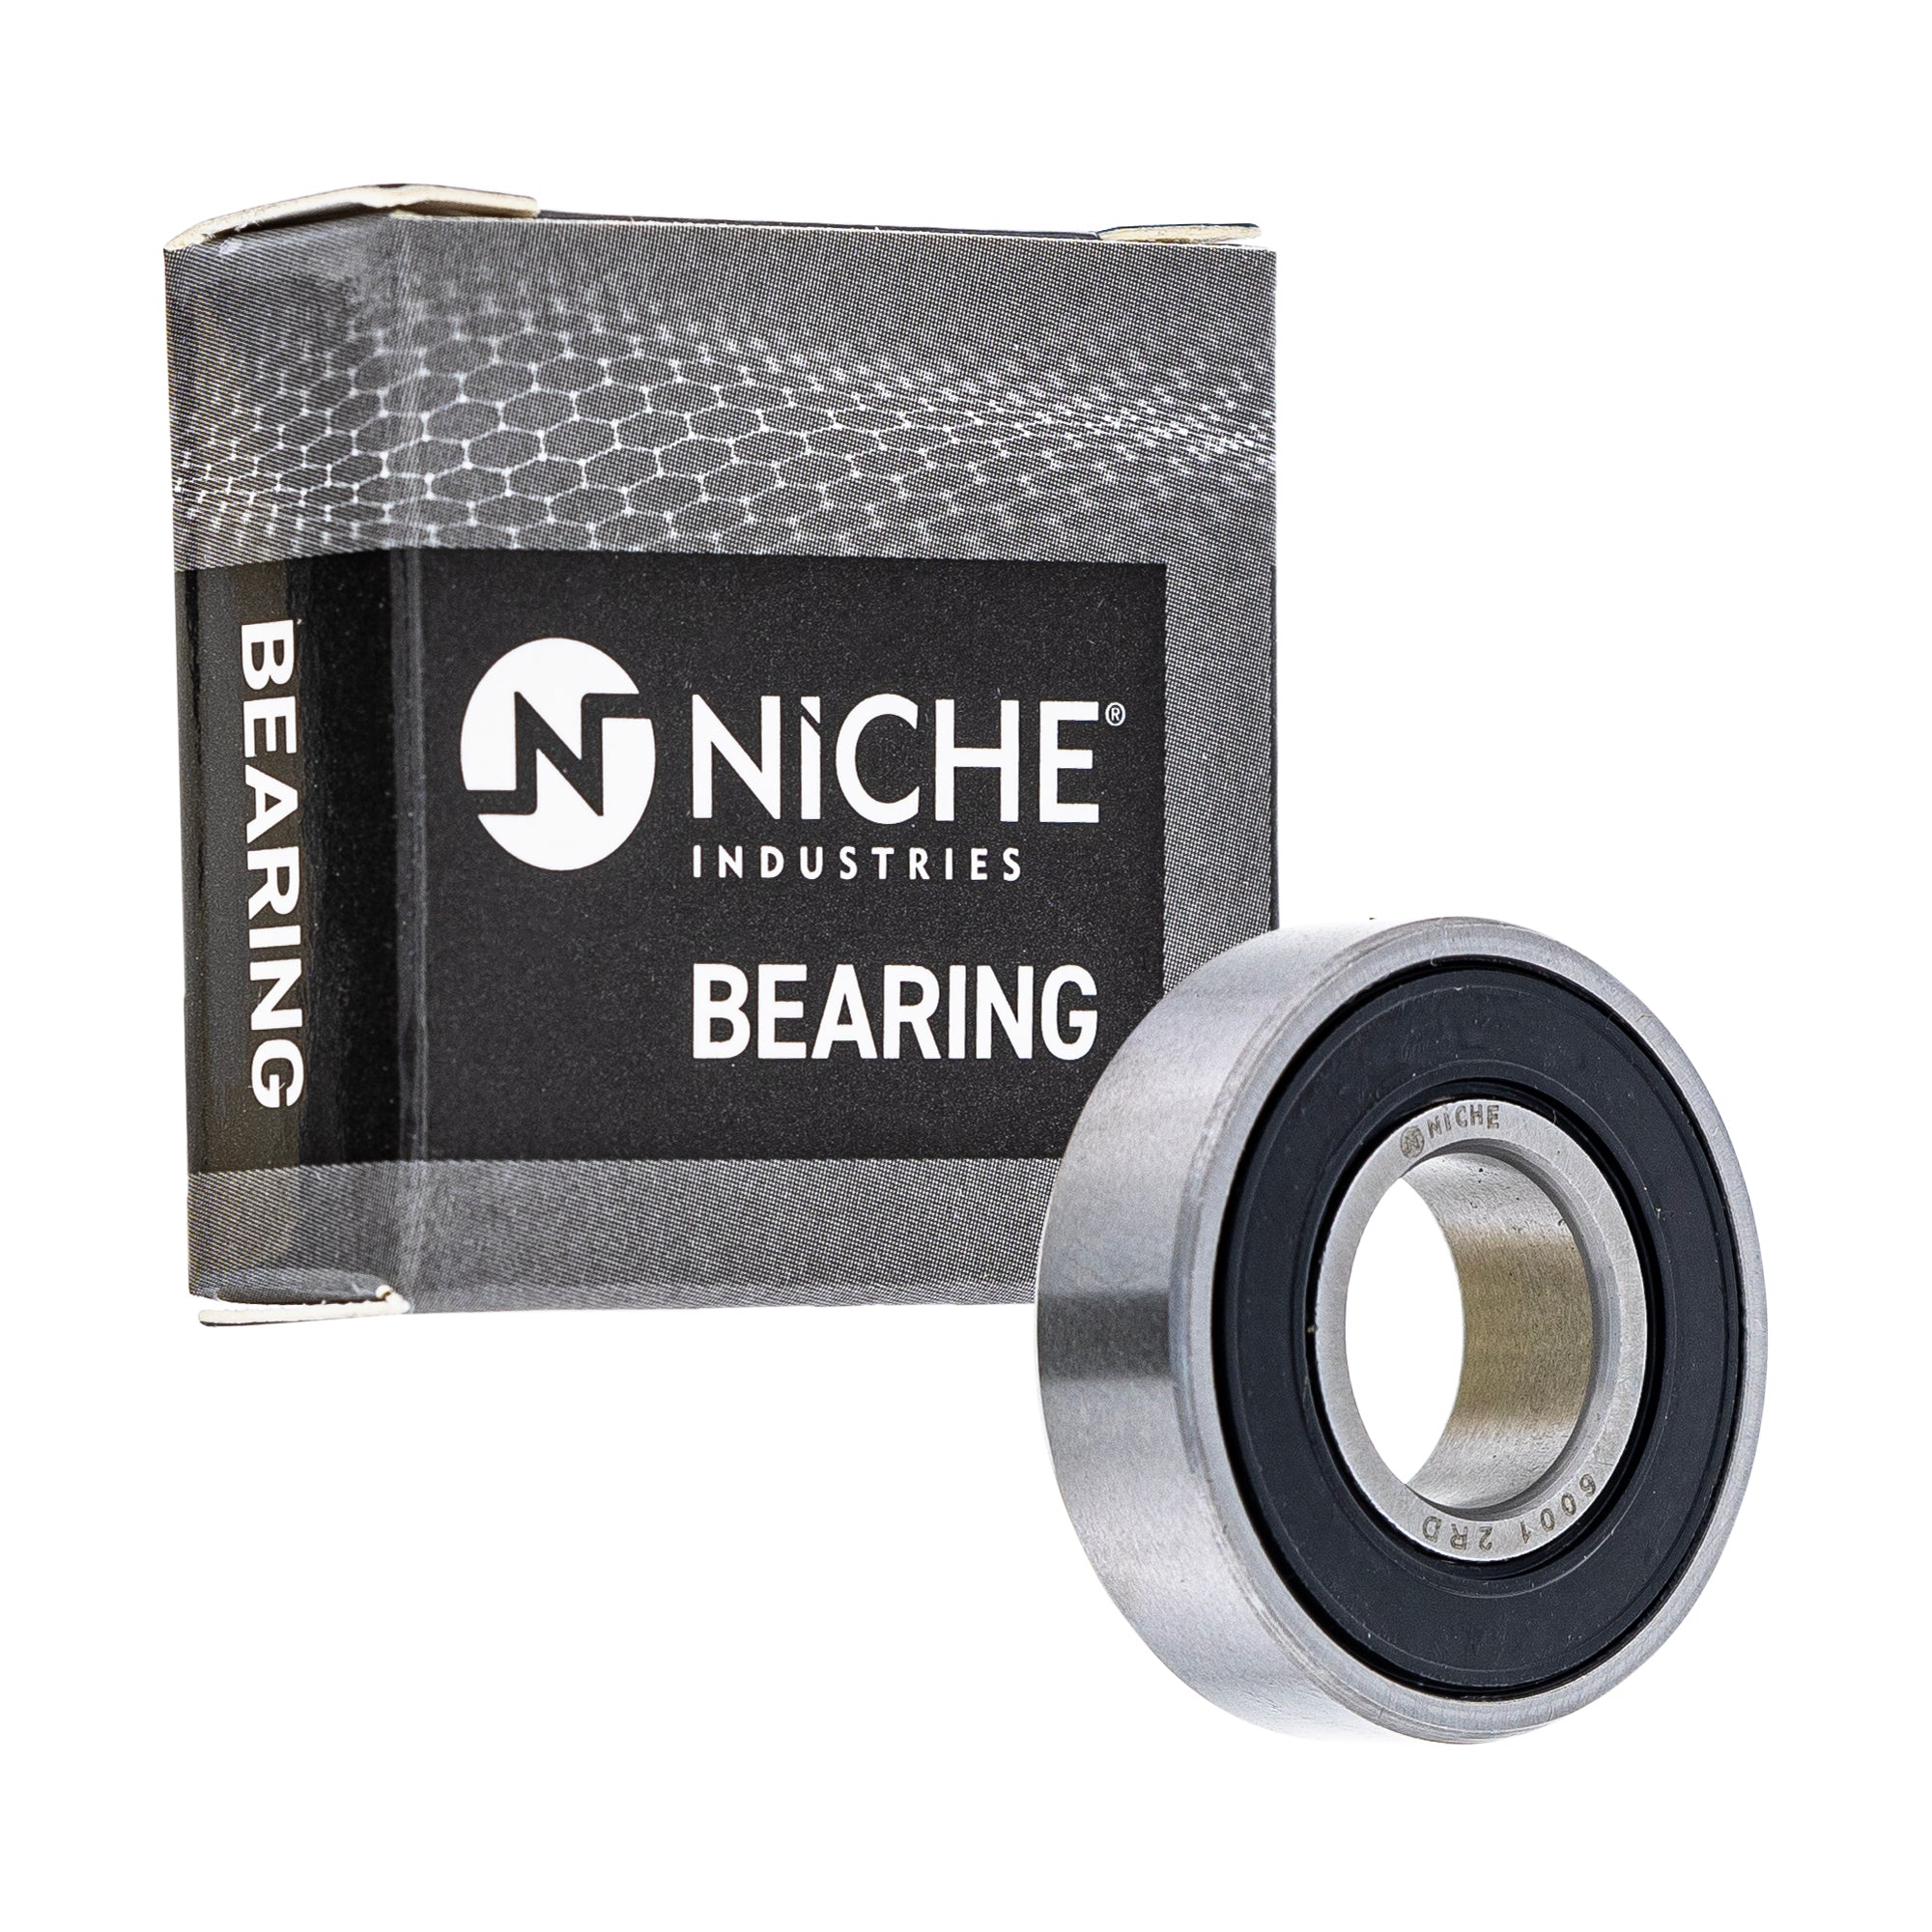 NICHE 519-CBB2333R Bearing 2-Pack for zOTHER YZ80 50